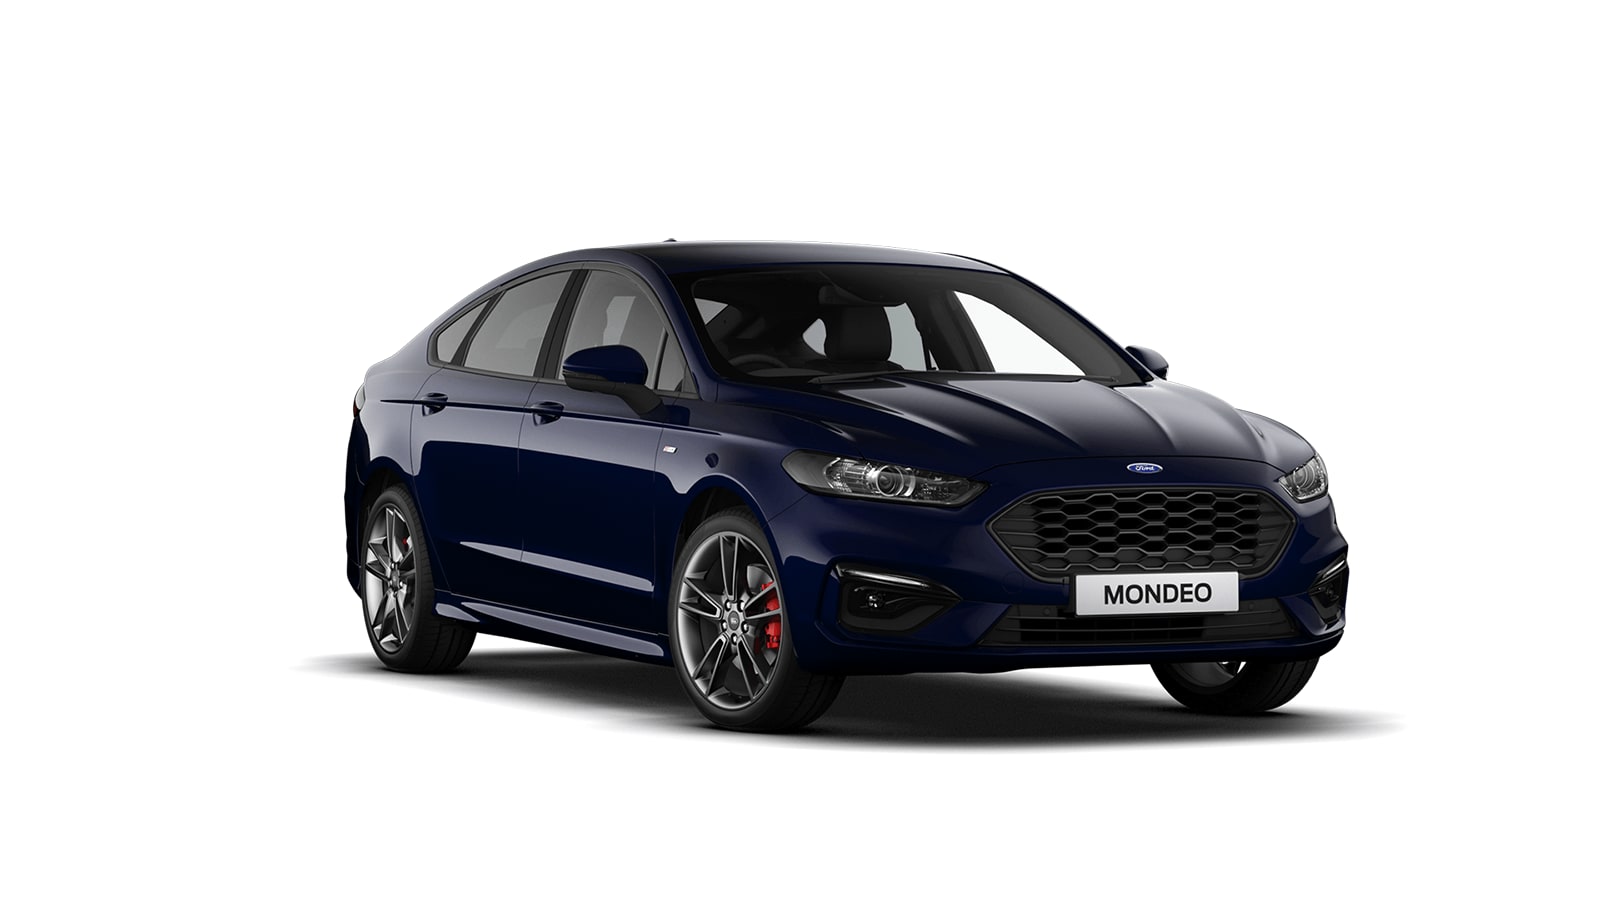 Ford Mondeo ST-Line Edition 2.0L EcoBlue 150PS at RGR Garages